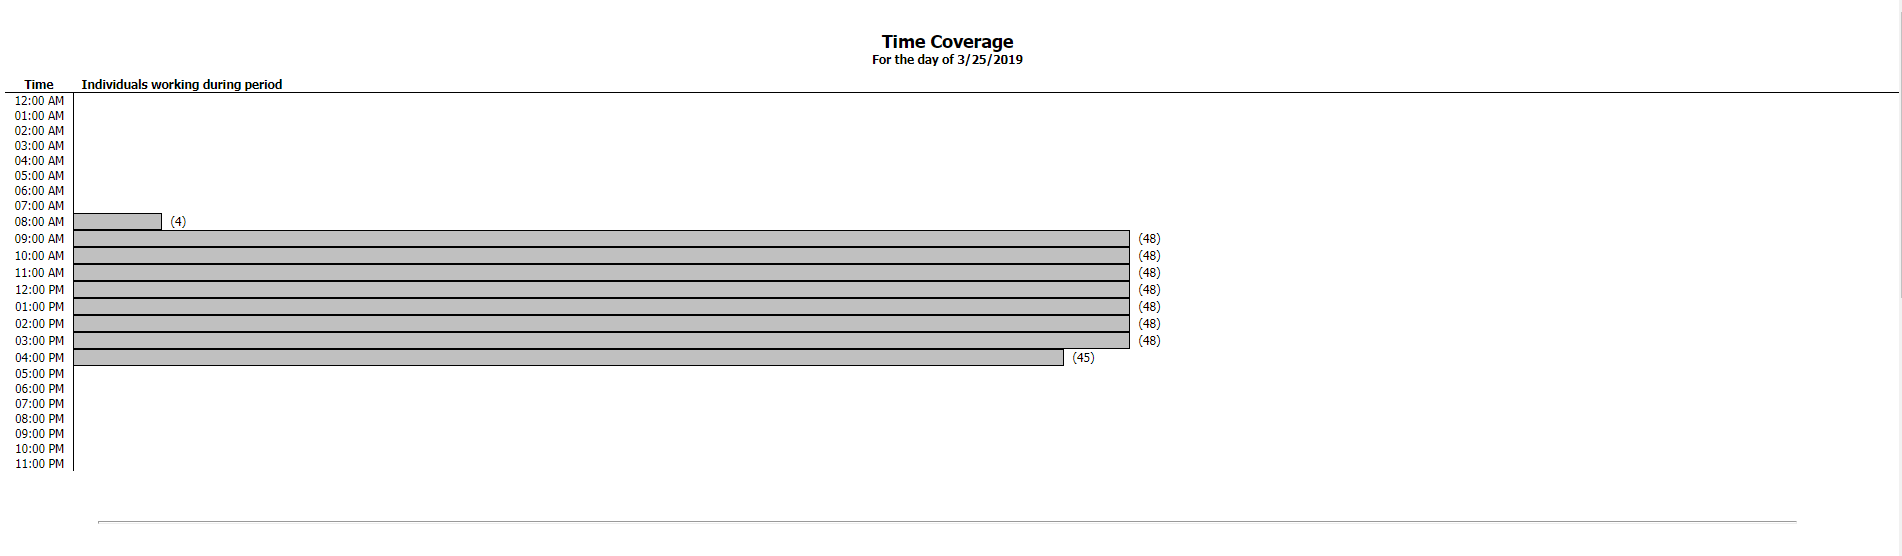 Time Coverage